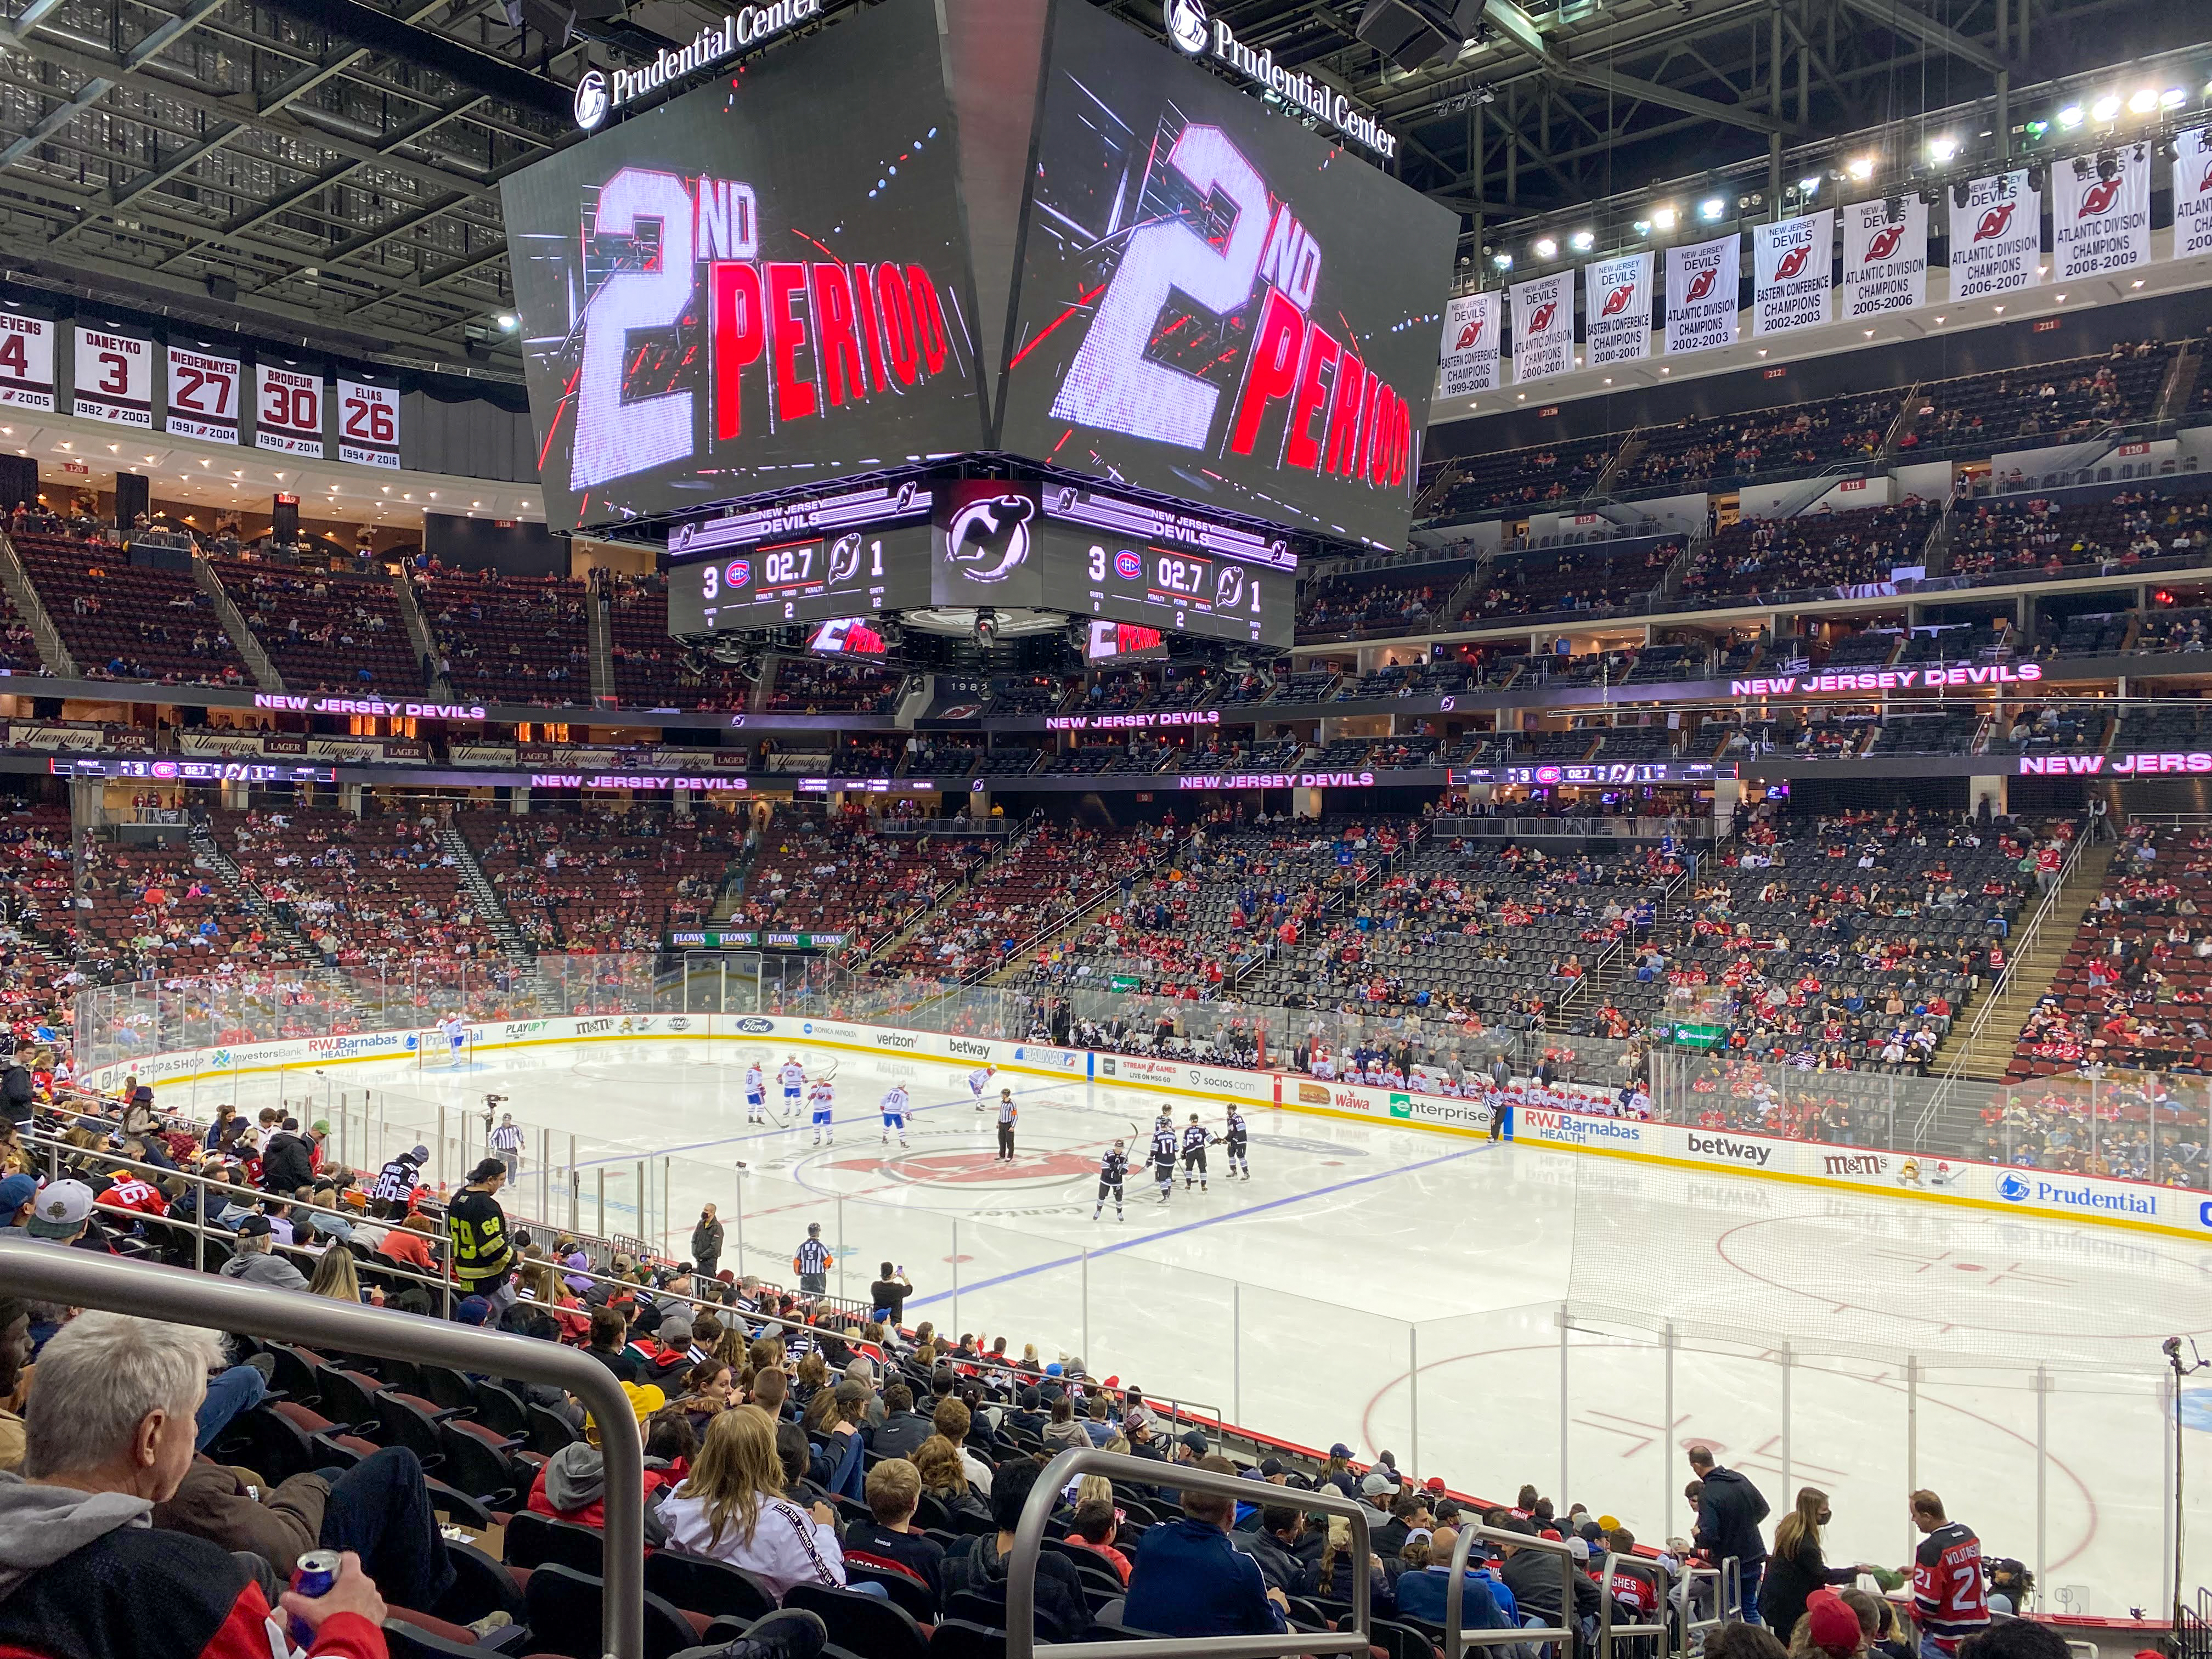 Prudential Center in March 2022 during a New Jersey Devil game.